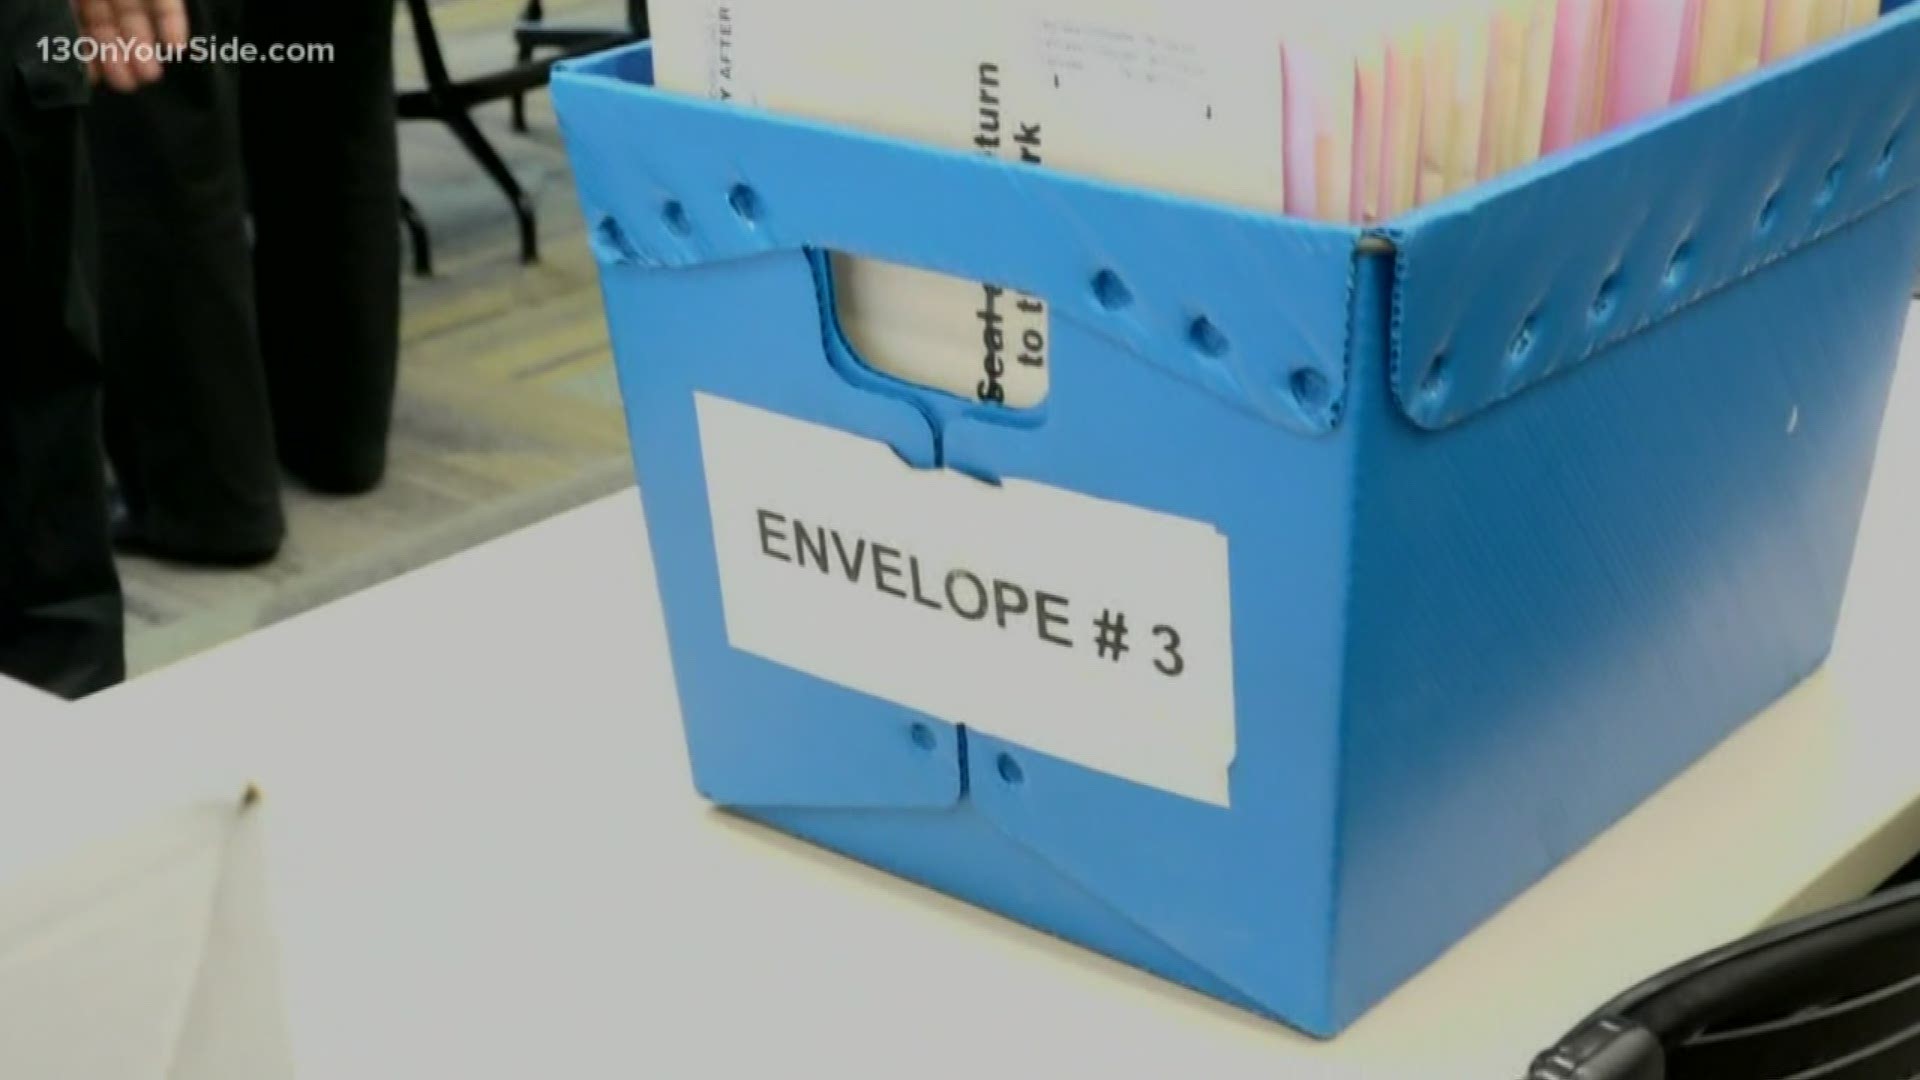 The City of Grand Rapids sent out more than 12,000 absentee ballots this year and saw an 84% return.